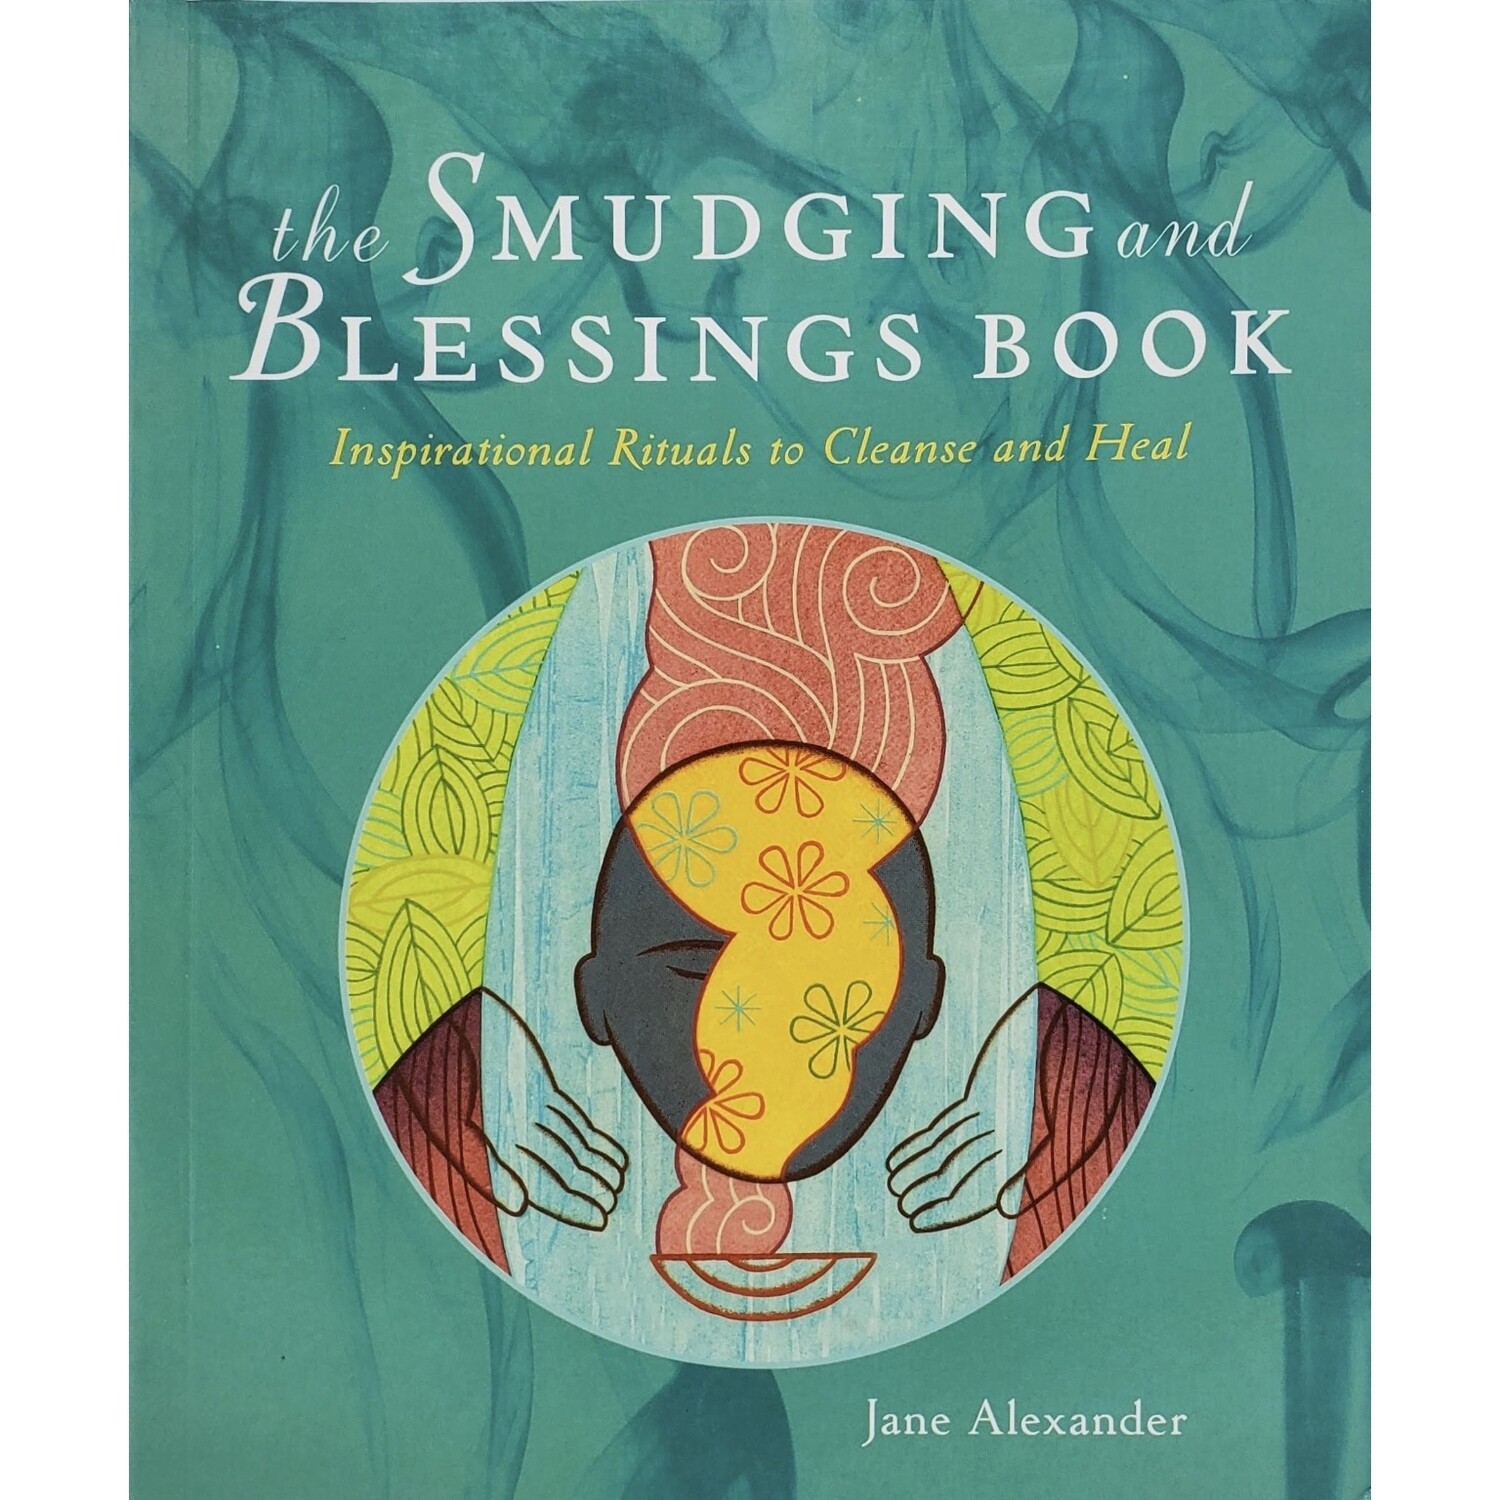 SMUDGING AND BLESSING BOOK